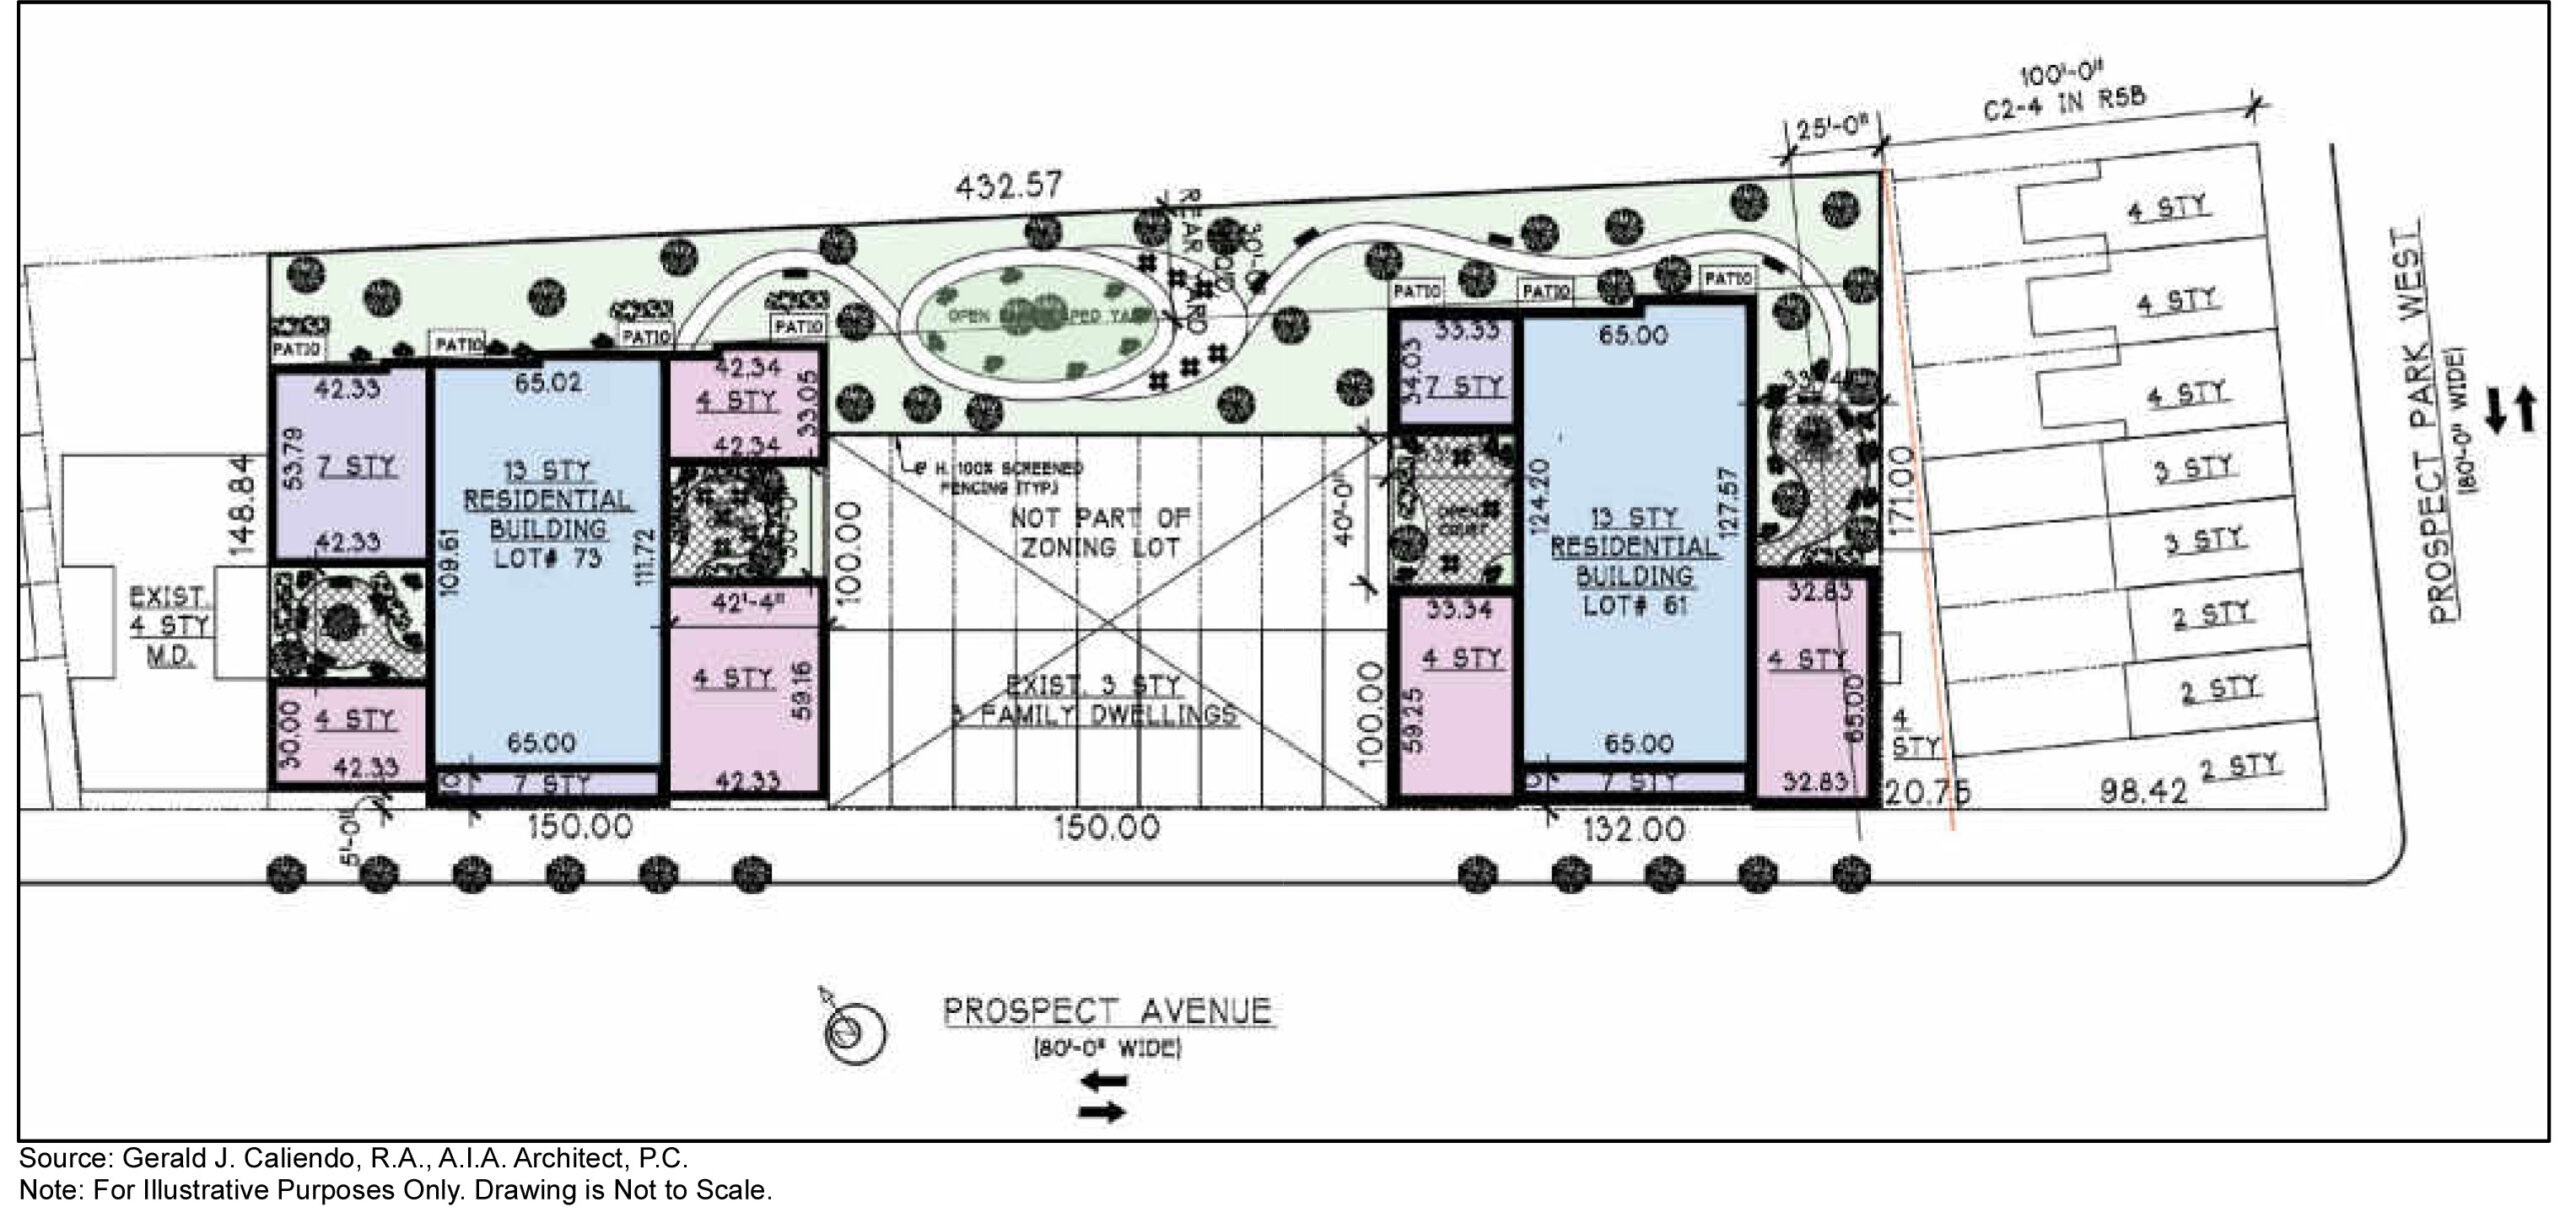 site plan with two, 13-story buidlings